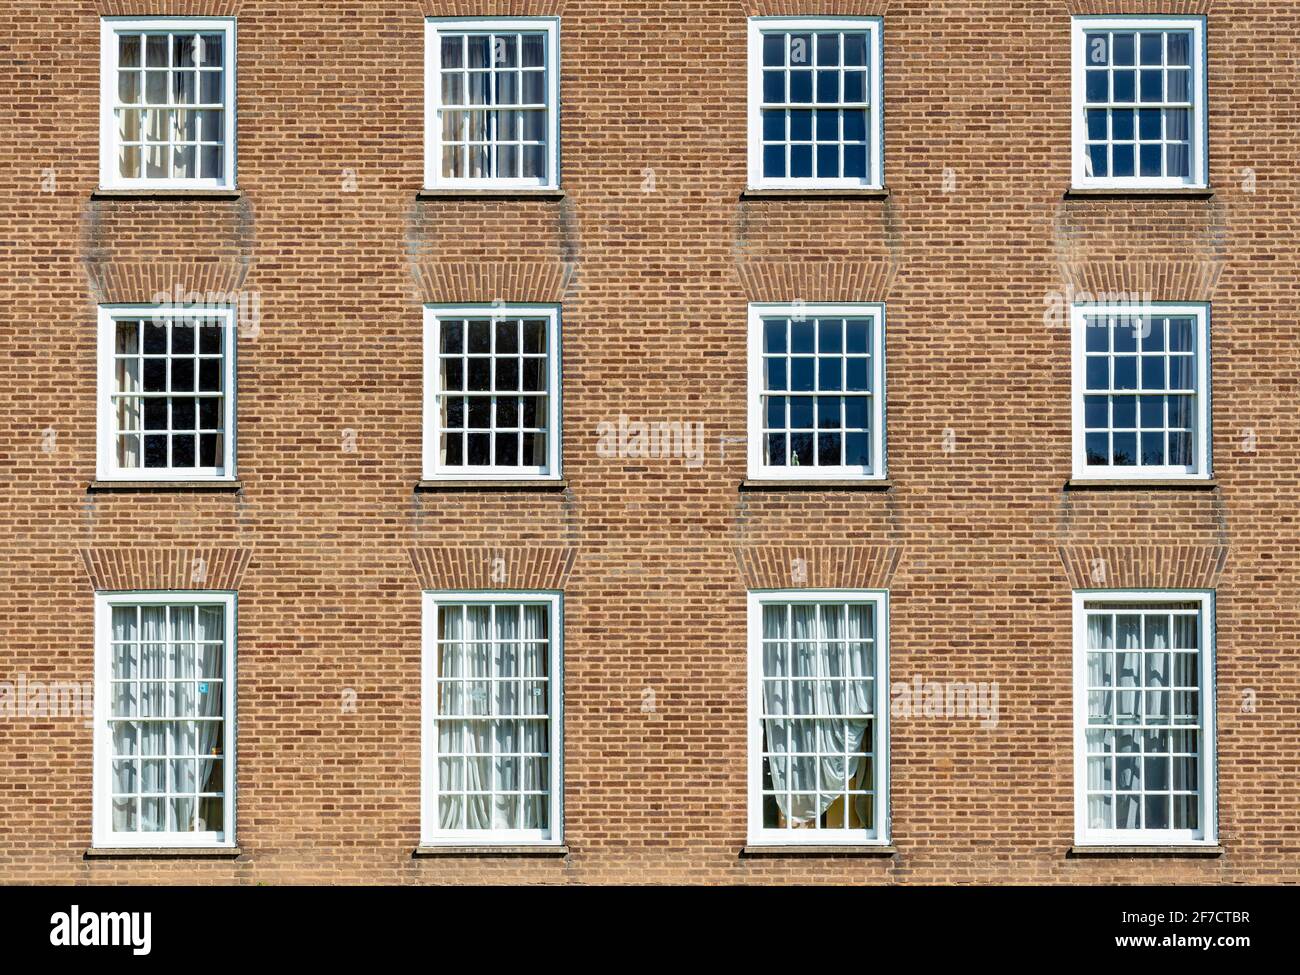 Brick wall with multiple windows in a brick wall with georgian windows multi framed glass windows rows of windows Stock Photo